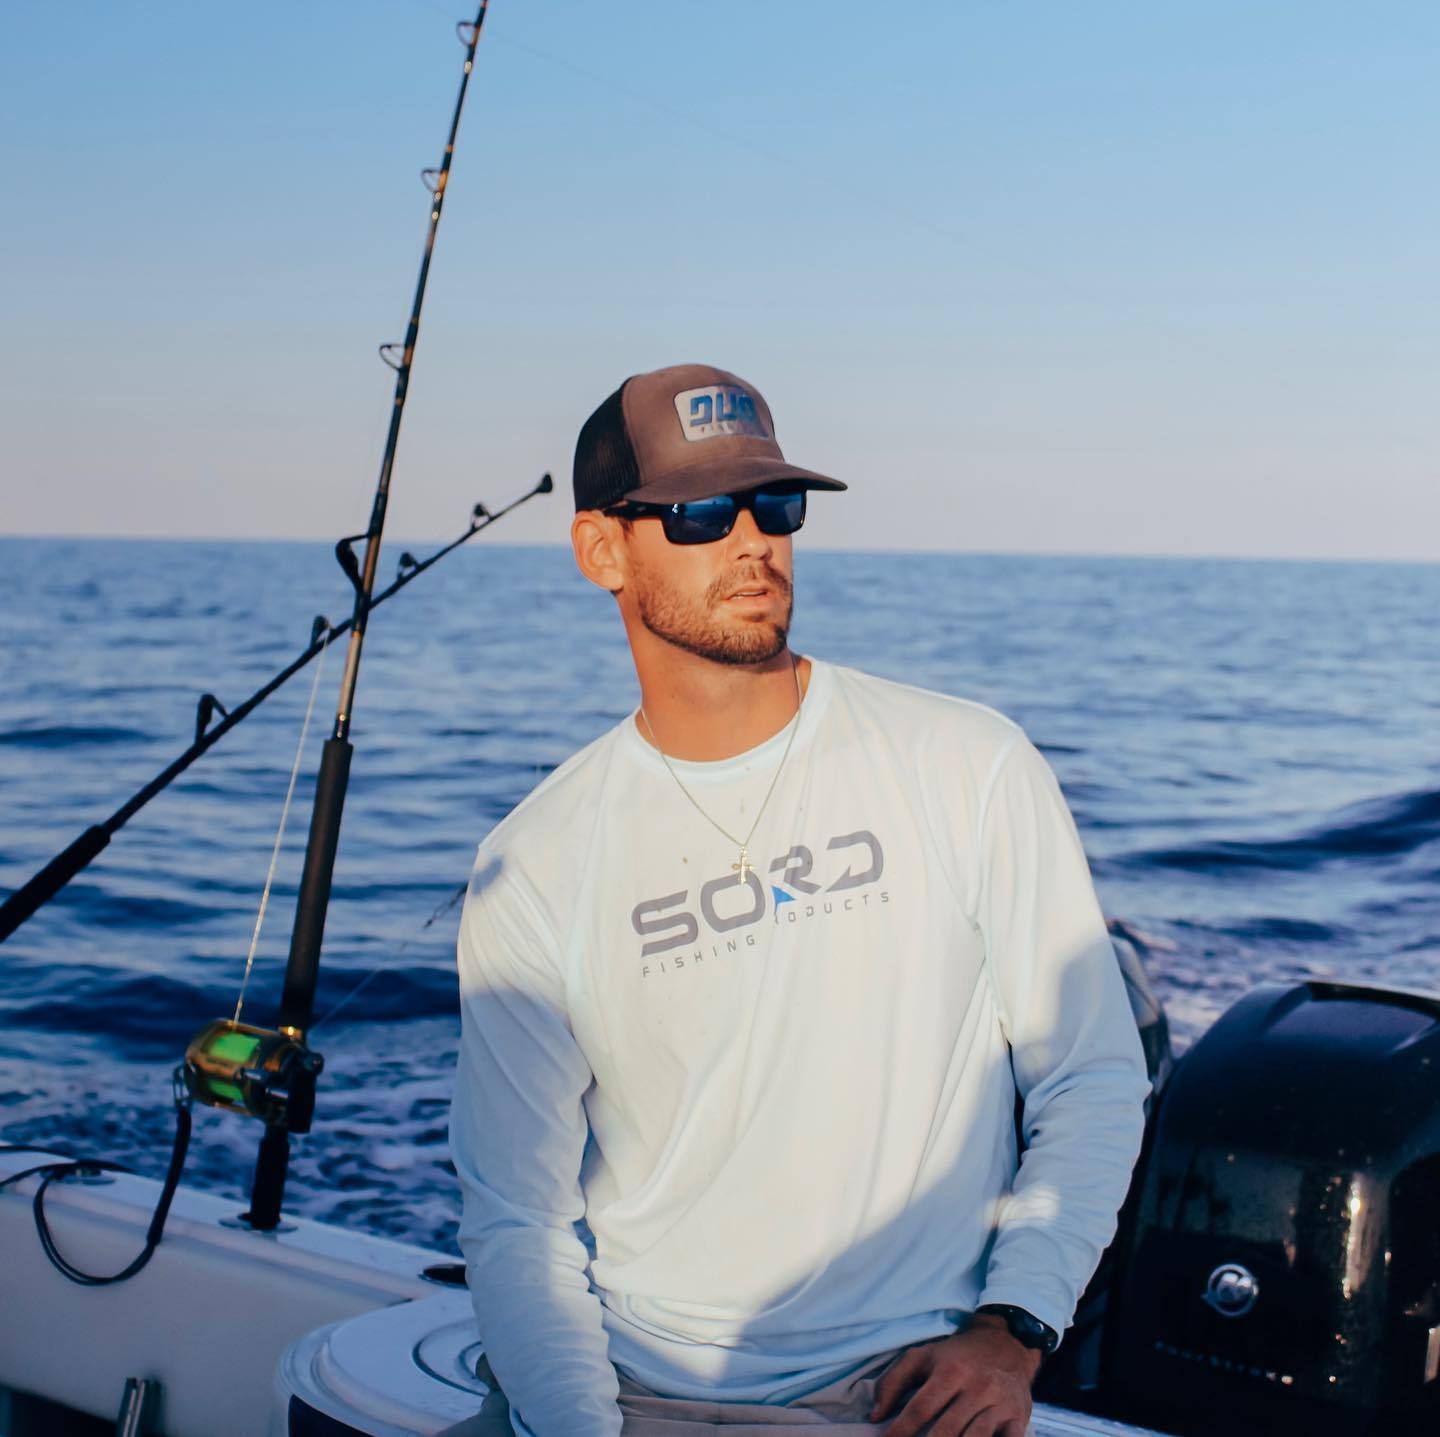 50% Off SORD SPF50+ Performance Fishing Shirt Sale! Small-4XL - The Hull  Truth - Boating and Fishing Forum